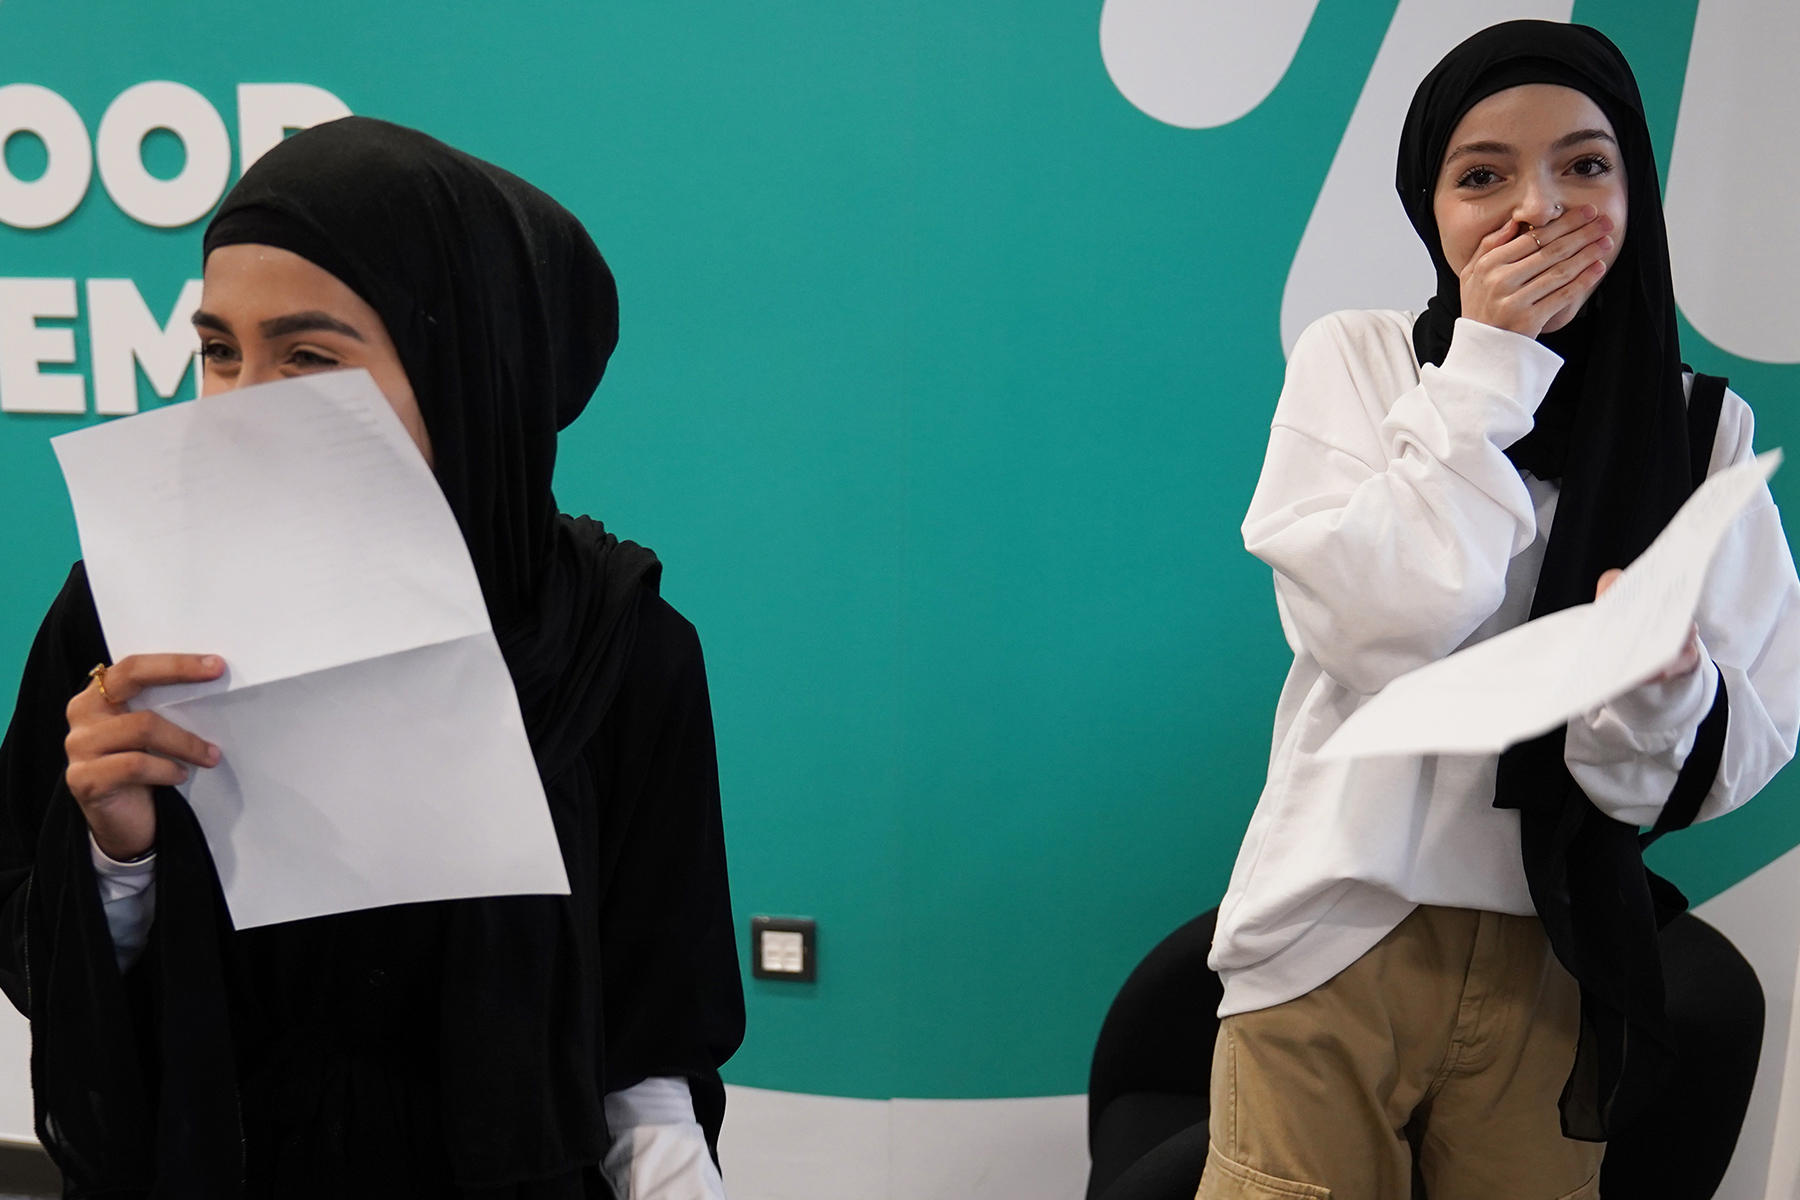 Two students with happy, surprise expressions holding exam results